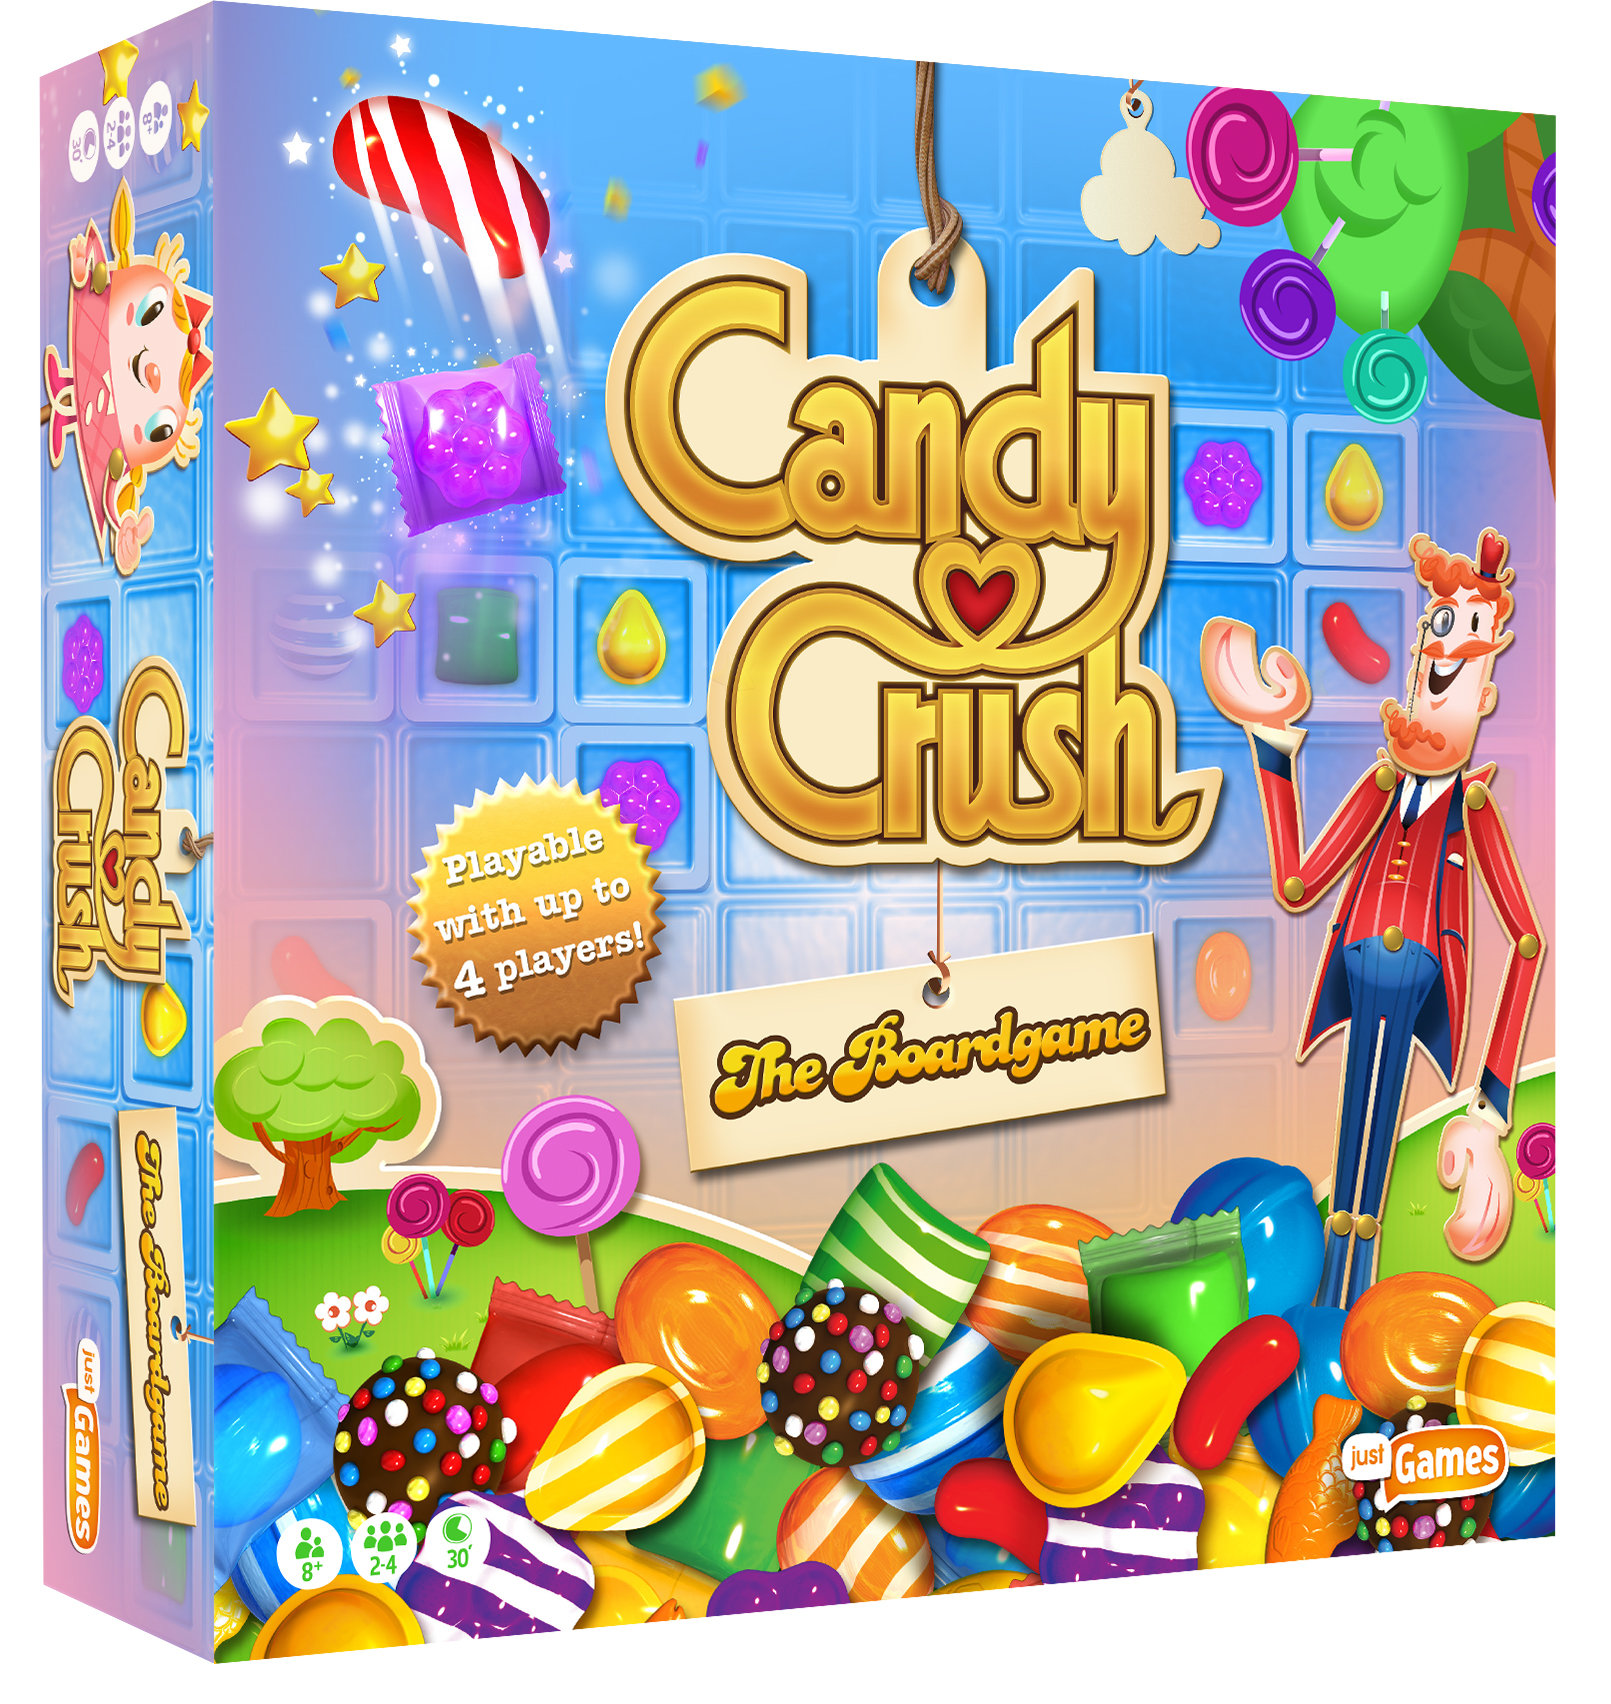 3rd-strike-candy-crush-the-boardgame-board-game-review